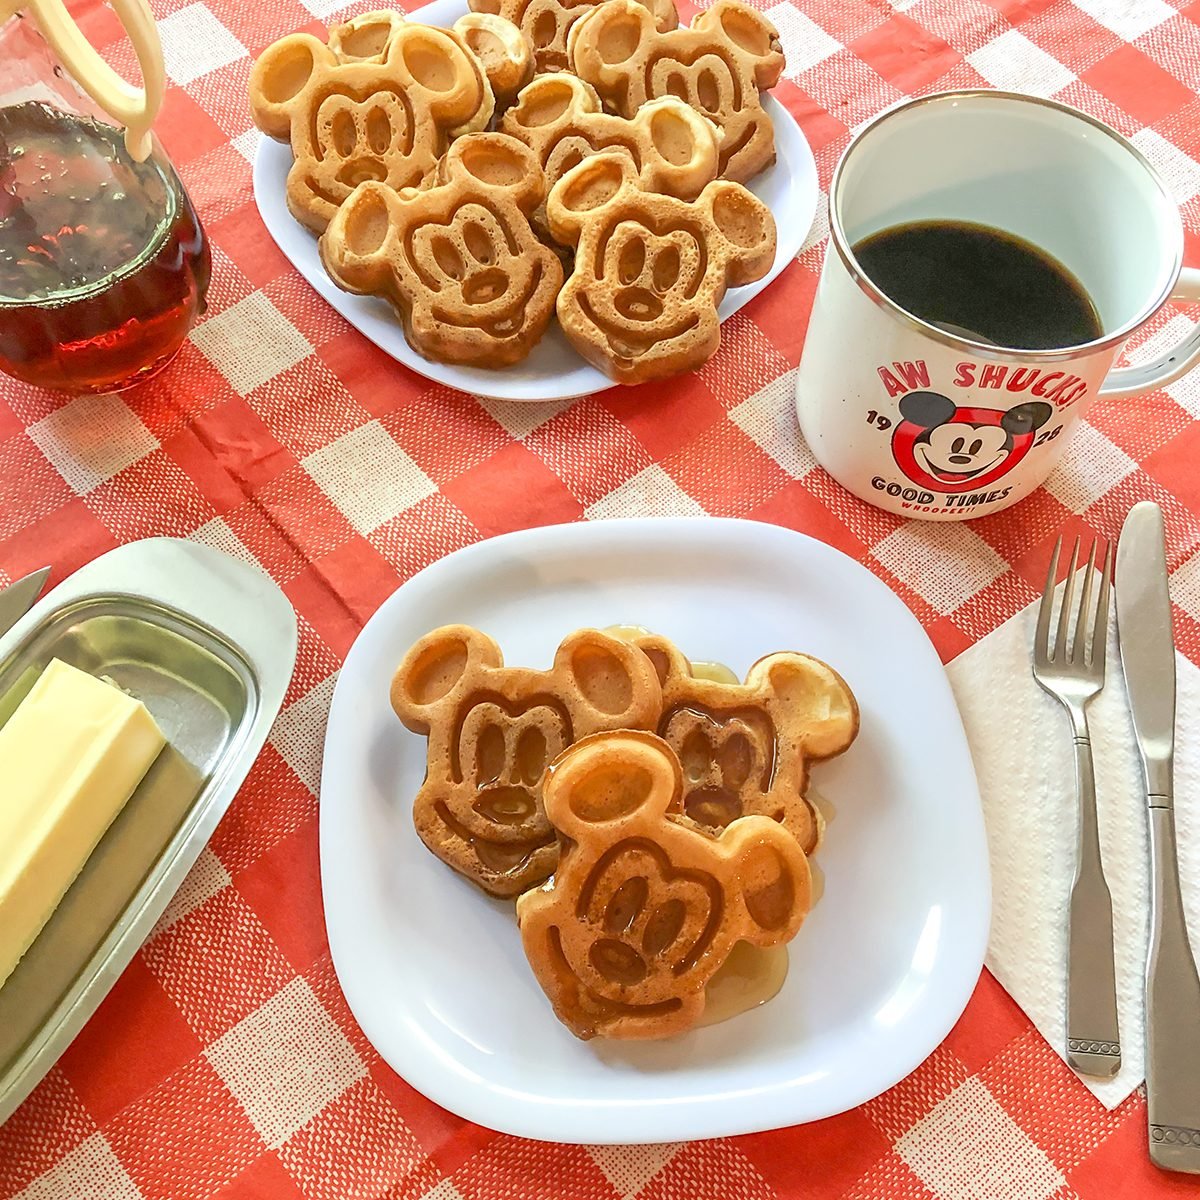 https://www.tasteofhome.com/wp-content/uploads/2021/09/Mickey-Waffles-Square.jpg?fit=700%2C1024